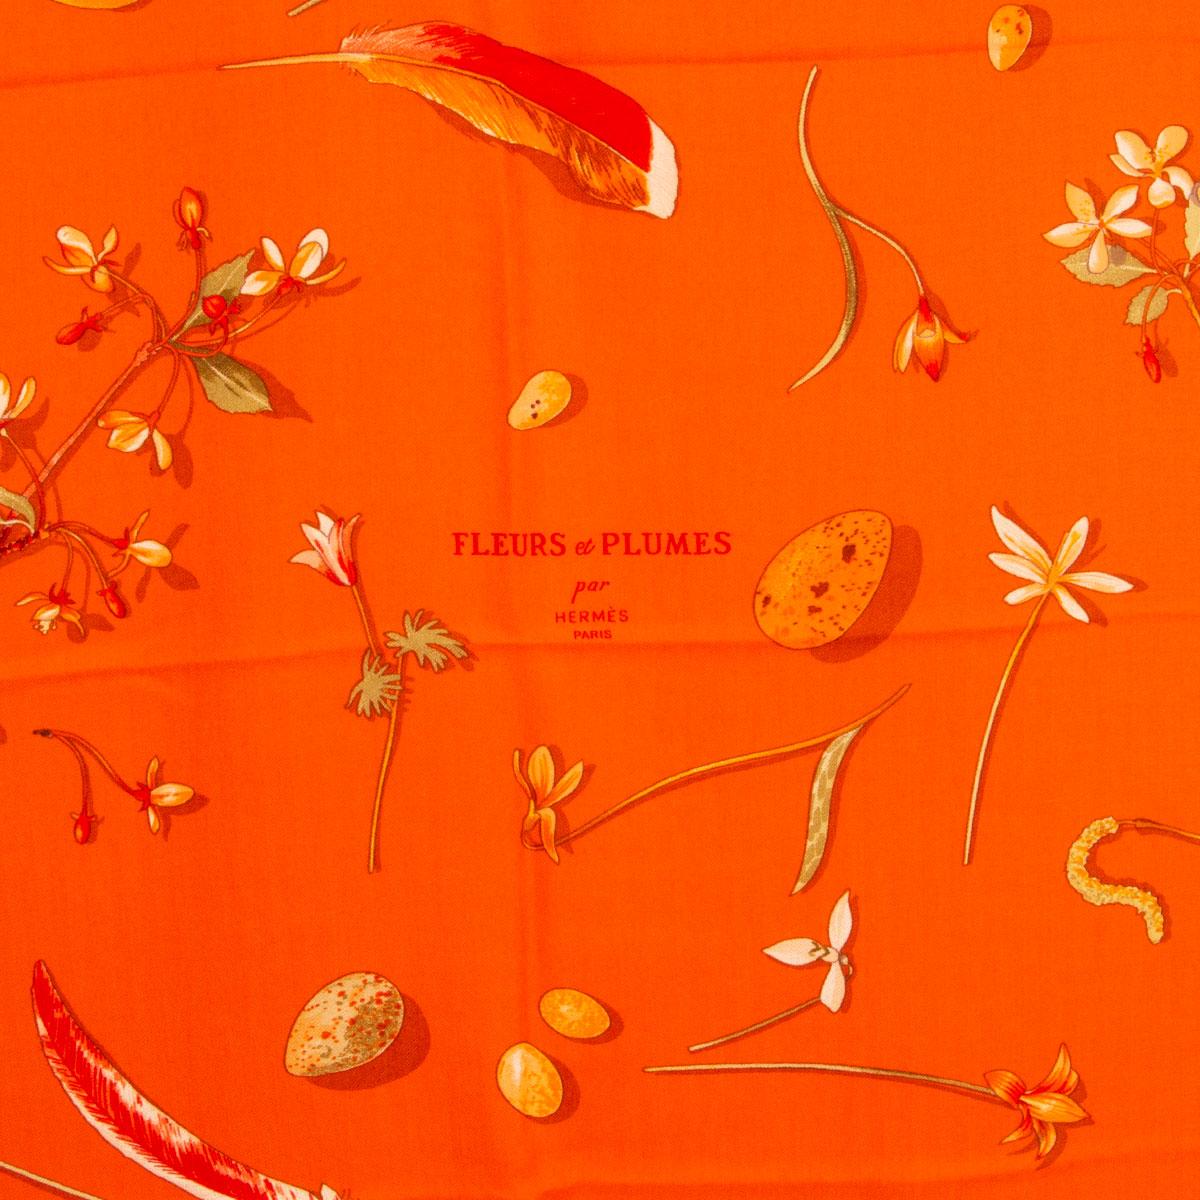 100% authentic Hermes 'Fleurs et Plumes 140' shawl by Leigh P. Cook in orange cashmere (65%) and silk (35%) with details in green and various shades of orange. Has been worn and is in excellent condition.

Width 140cm (54.6in)
Height 140cm